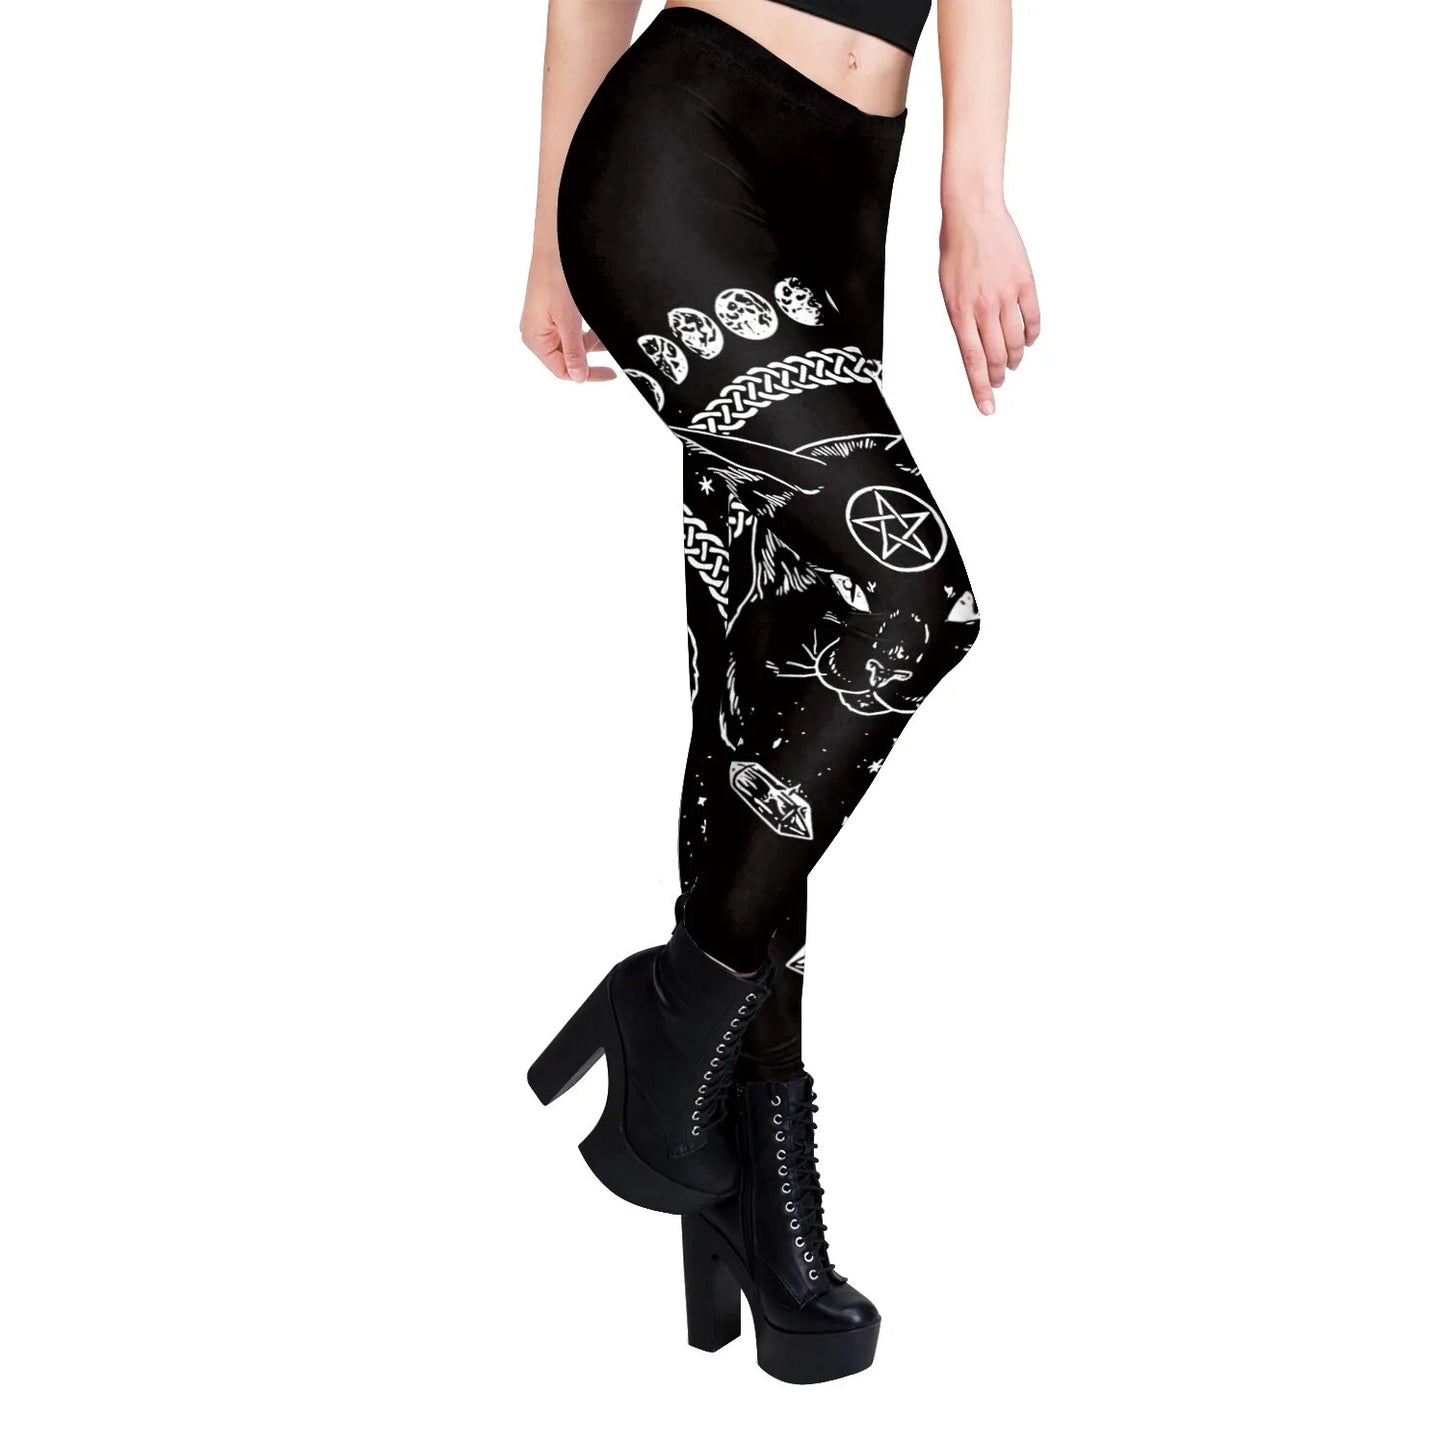 Gothic Black Graphic Leggings | Occult Black Cat | Mid Rise Form Fitting Sleek & Stylish Total Comfort - A Gothic Universe - Leggings